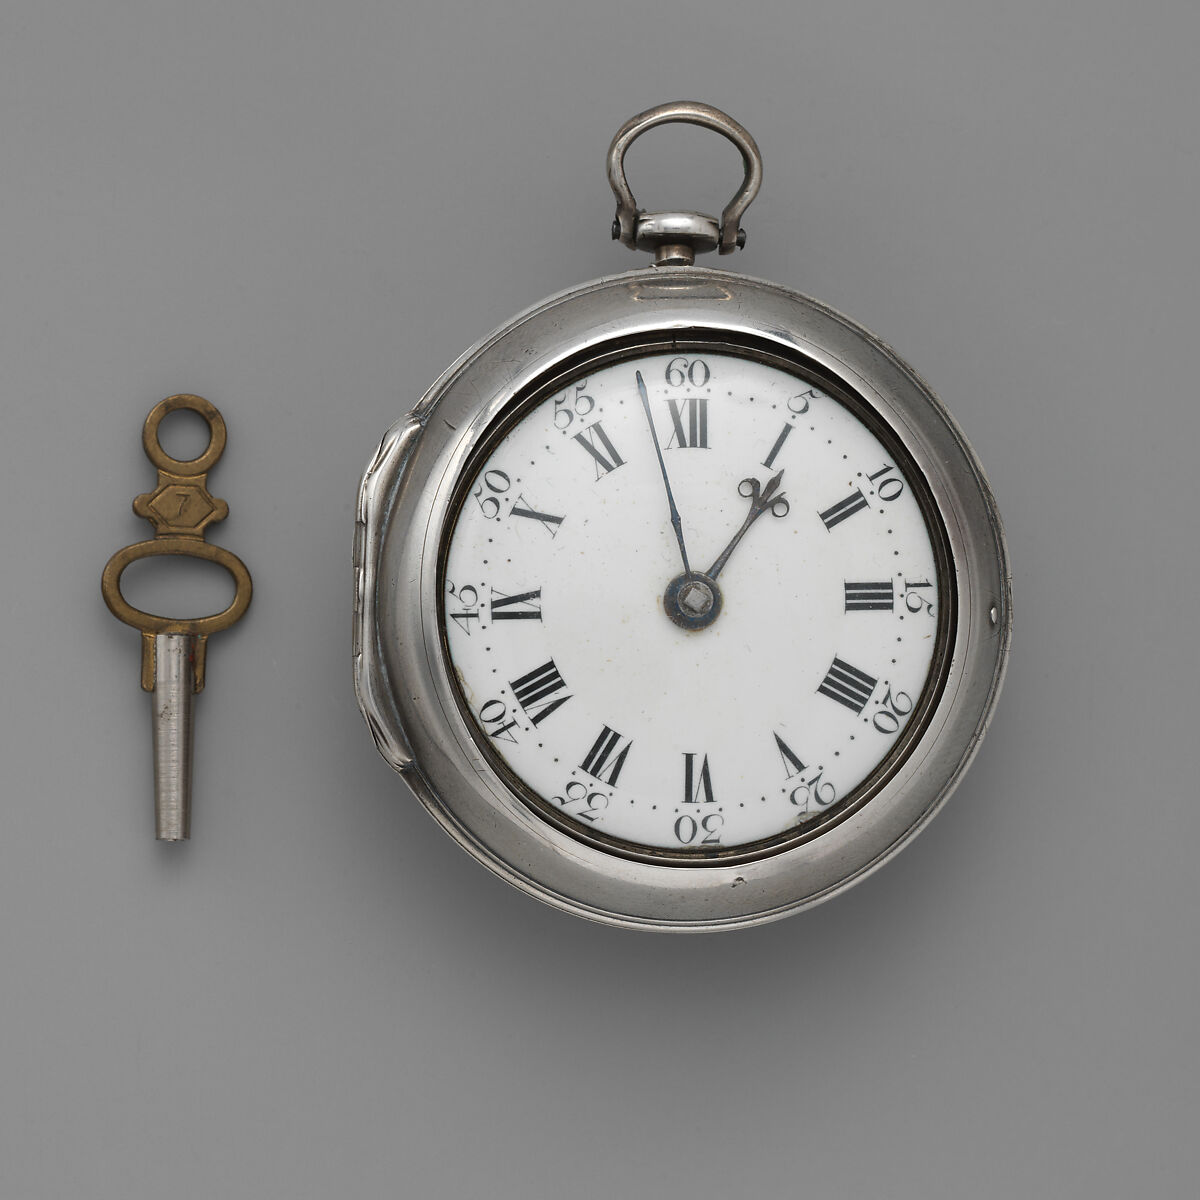 Pair-case watch and key, Watchmaker: Stephen Gibbs (British, born ca. 1733, Clockmakers&#39; Company 1748–64), Silver, painted enamel, brass and steel, British, London 